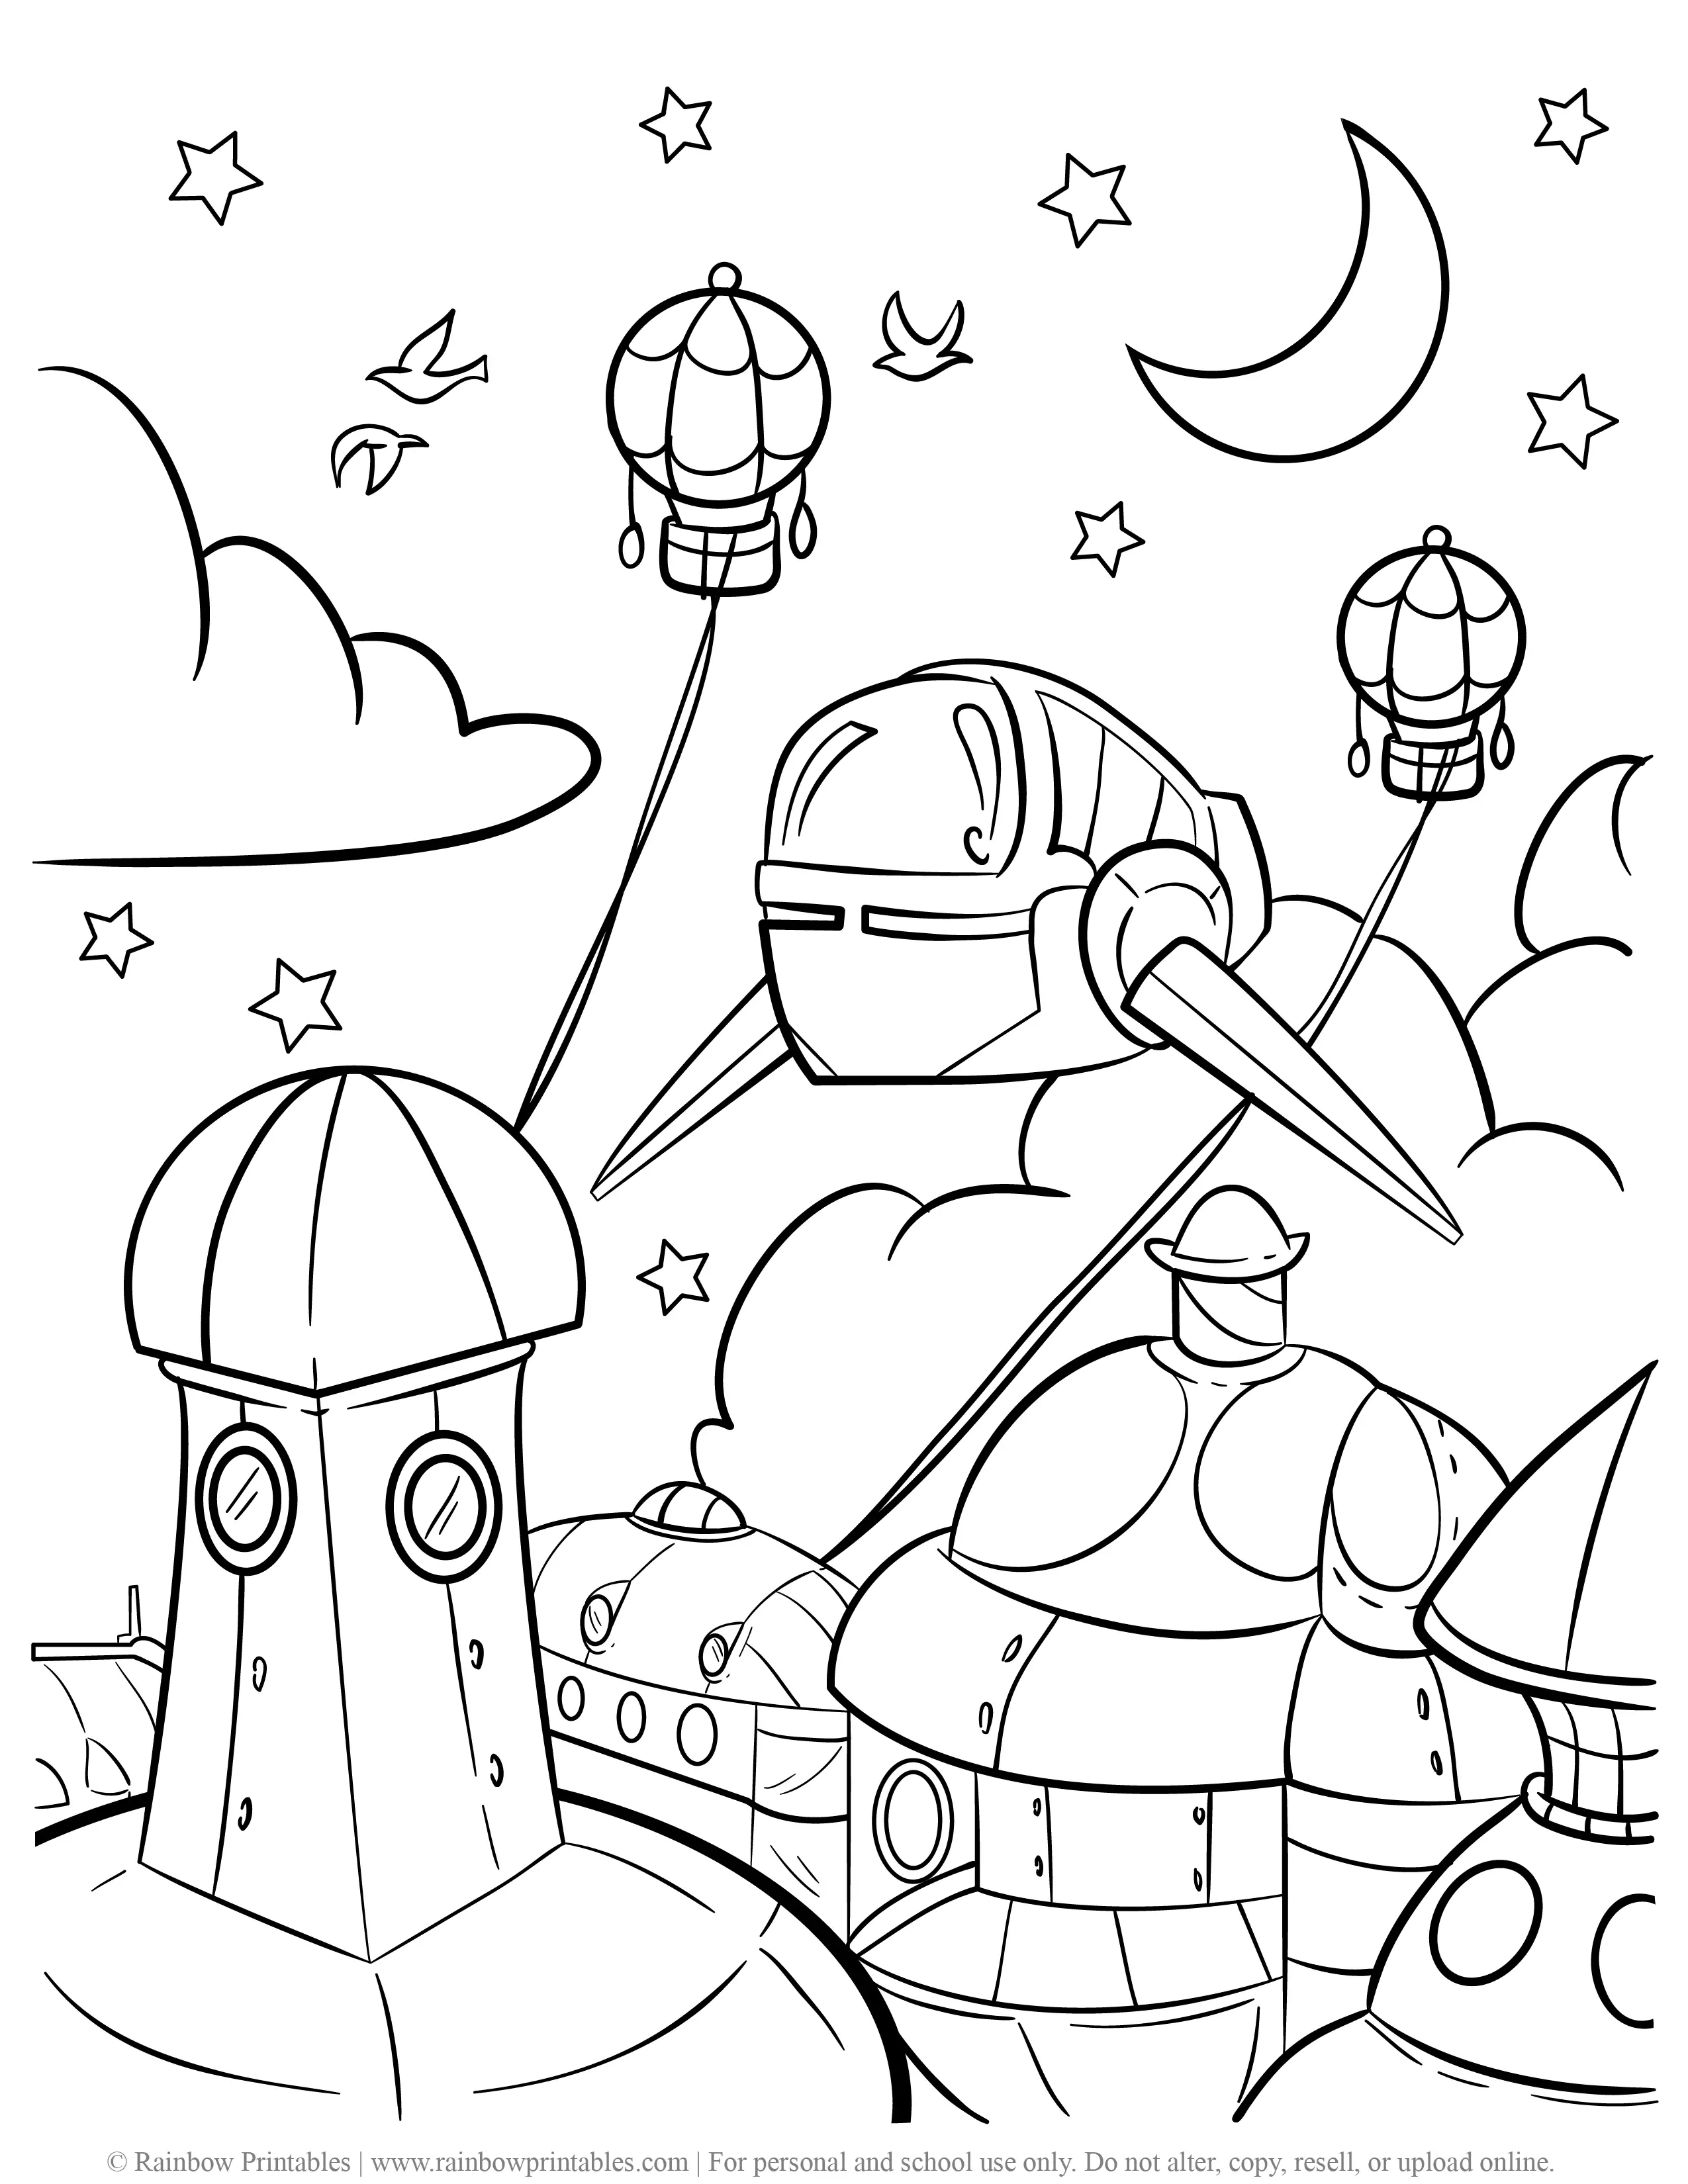 Cute Cartoon Steampunk Futuristic City Towers Blimps Spaceships Coloring Page for Kids Illustration